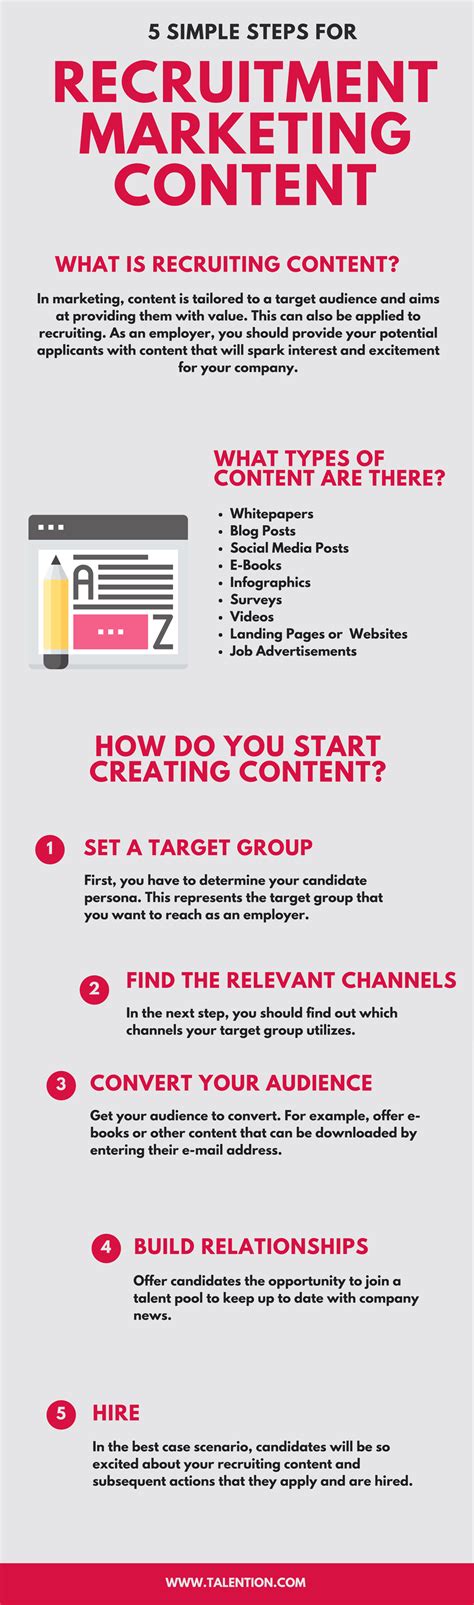 5 Simple Steps For Recruitment Marketing Content Infographic